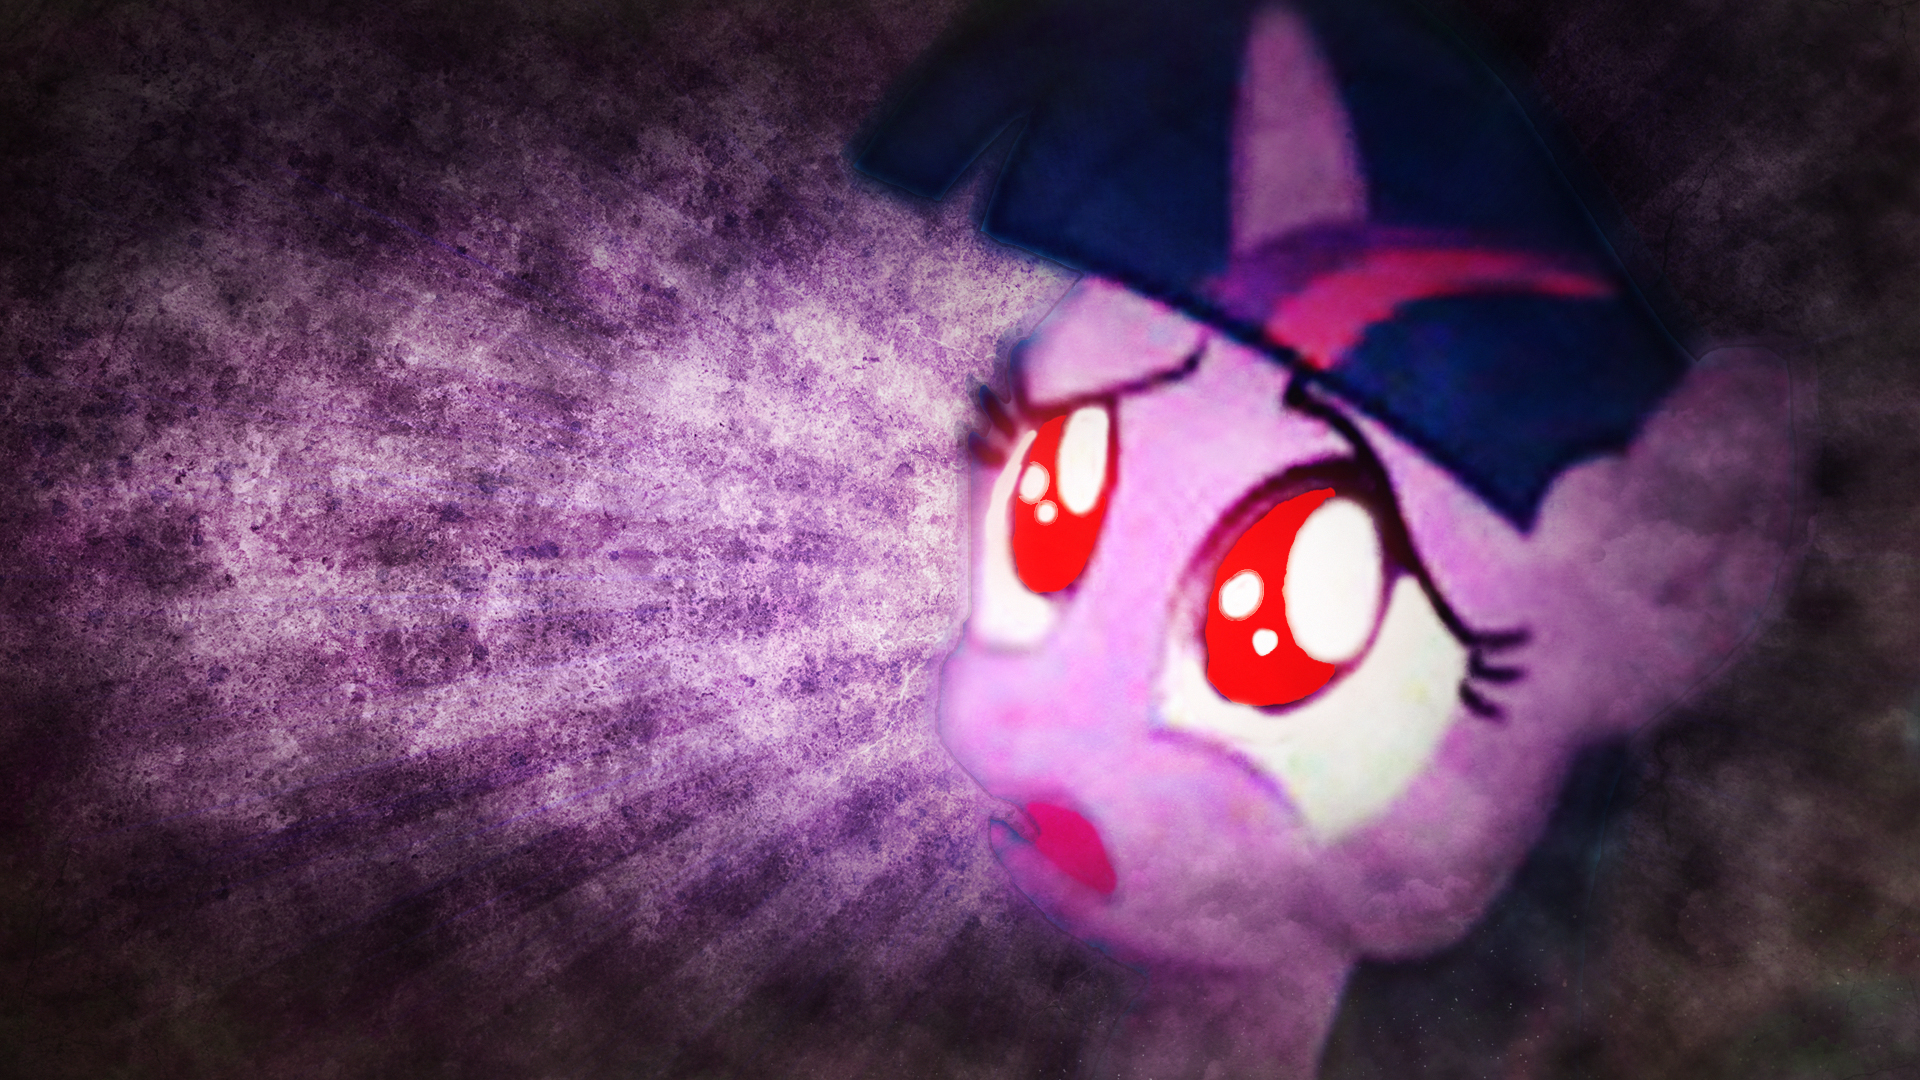 Wallpaper Commisson ~ Twilight Sparkle. by LuvEmiee and Mackaged